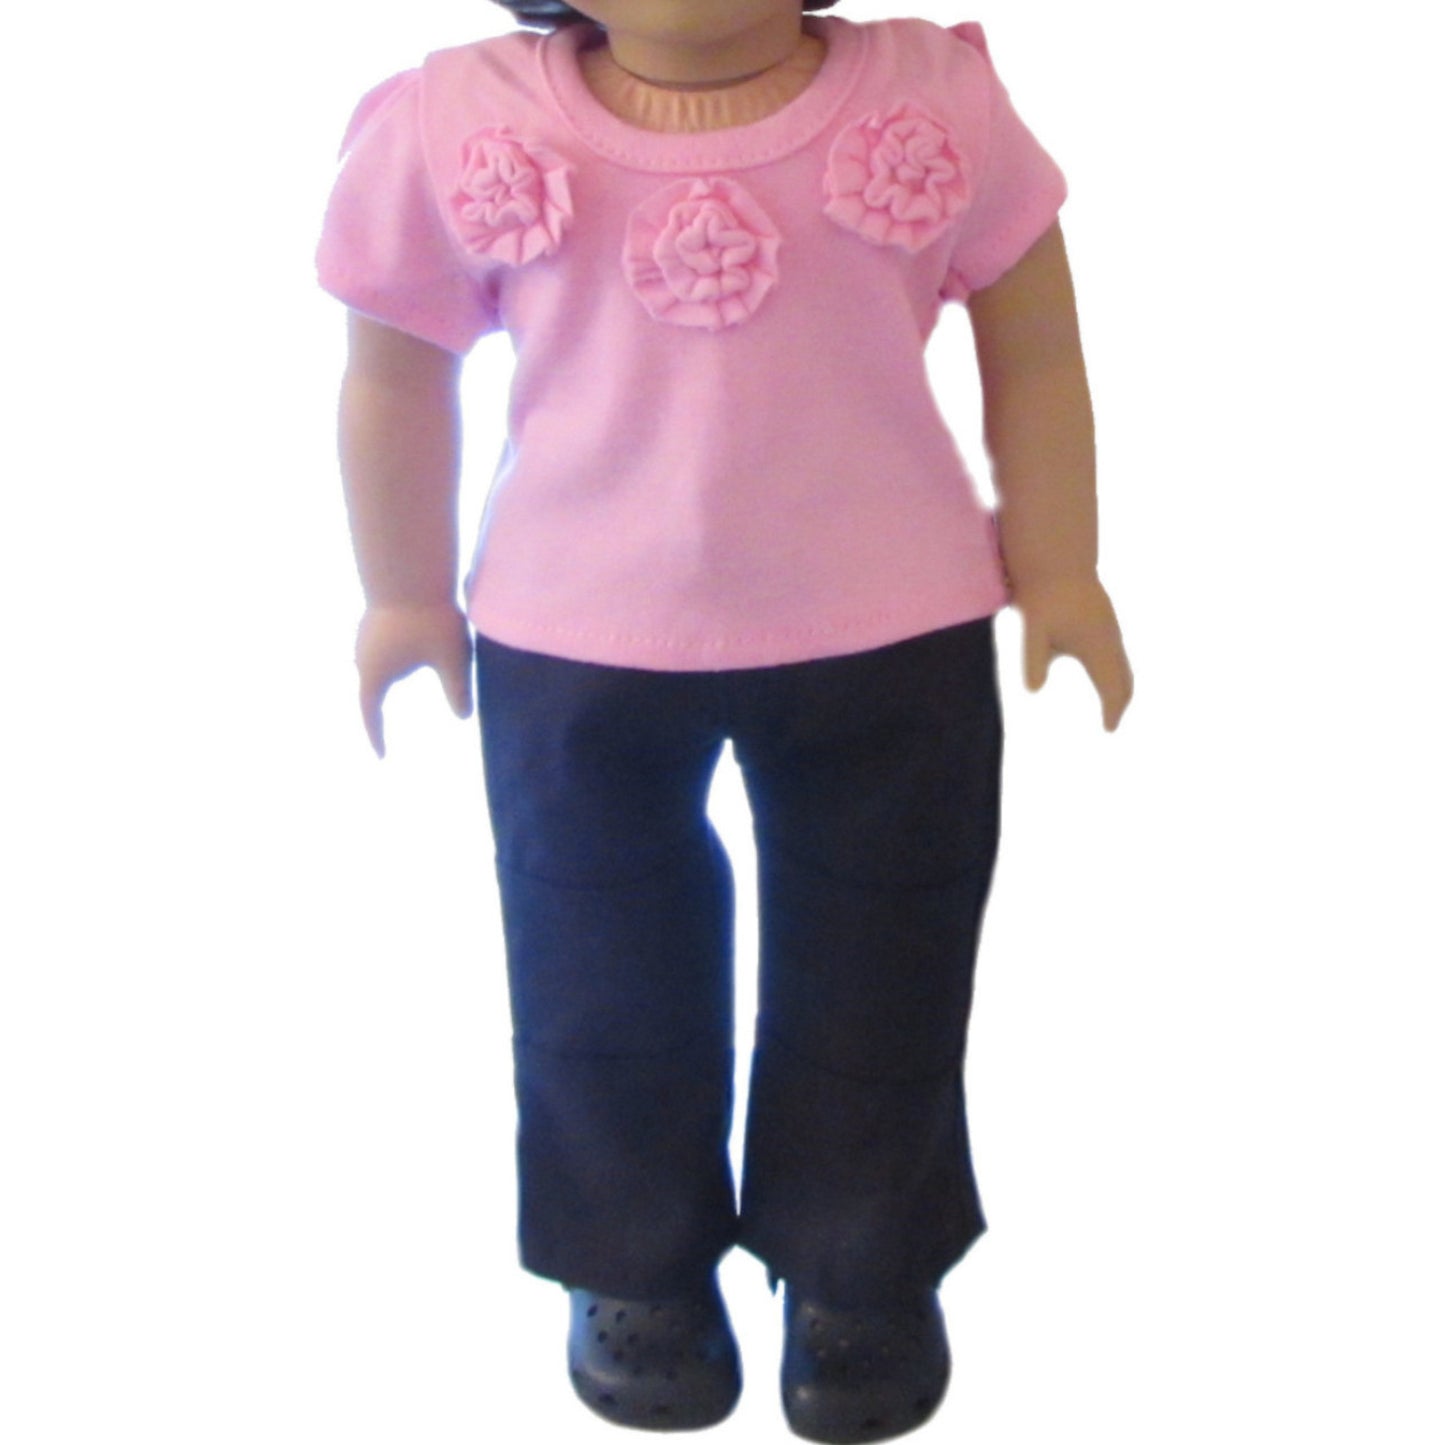 Pink Doll Top and Black Pants Outfits for 18-inch dolls